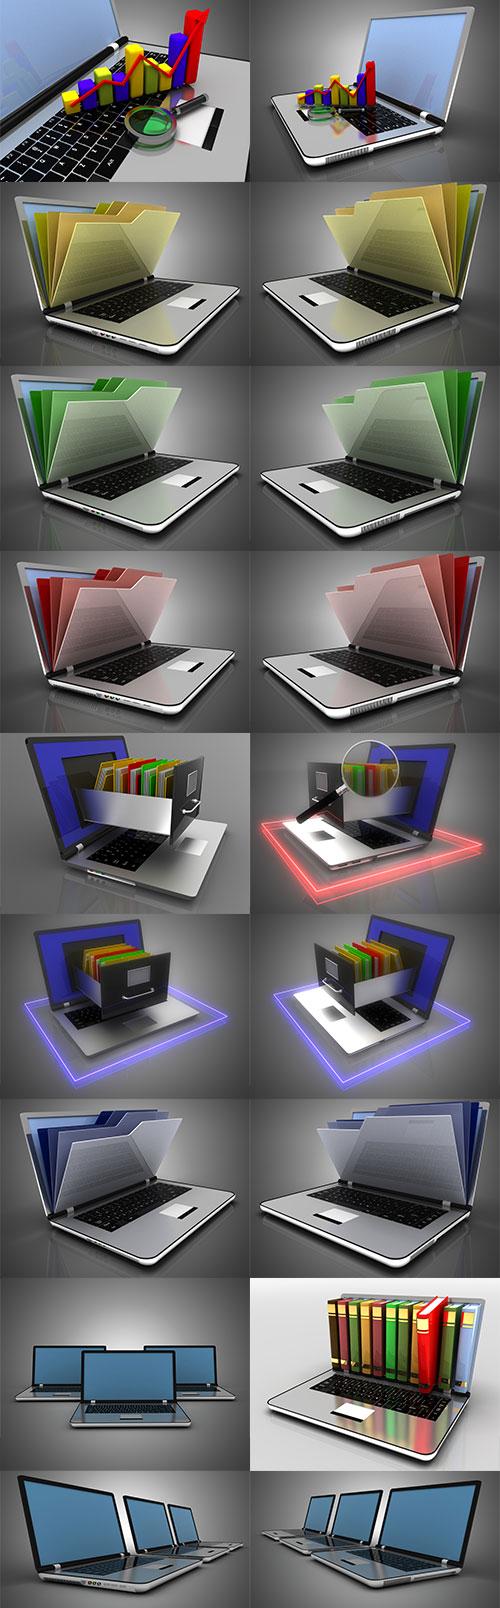 Laptop in 3D projection - Raster clipart